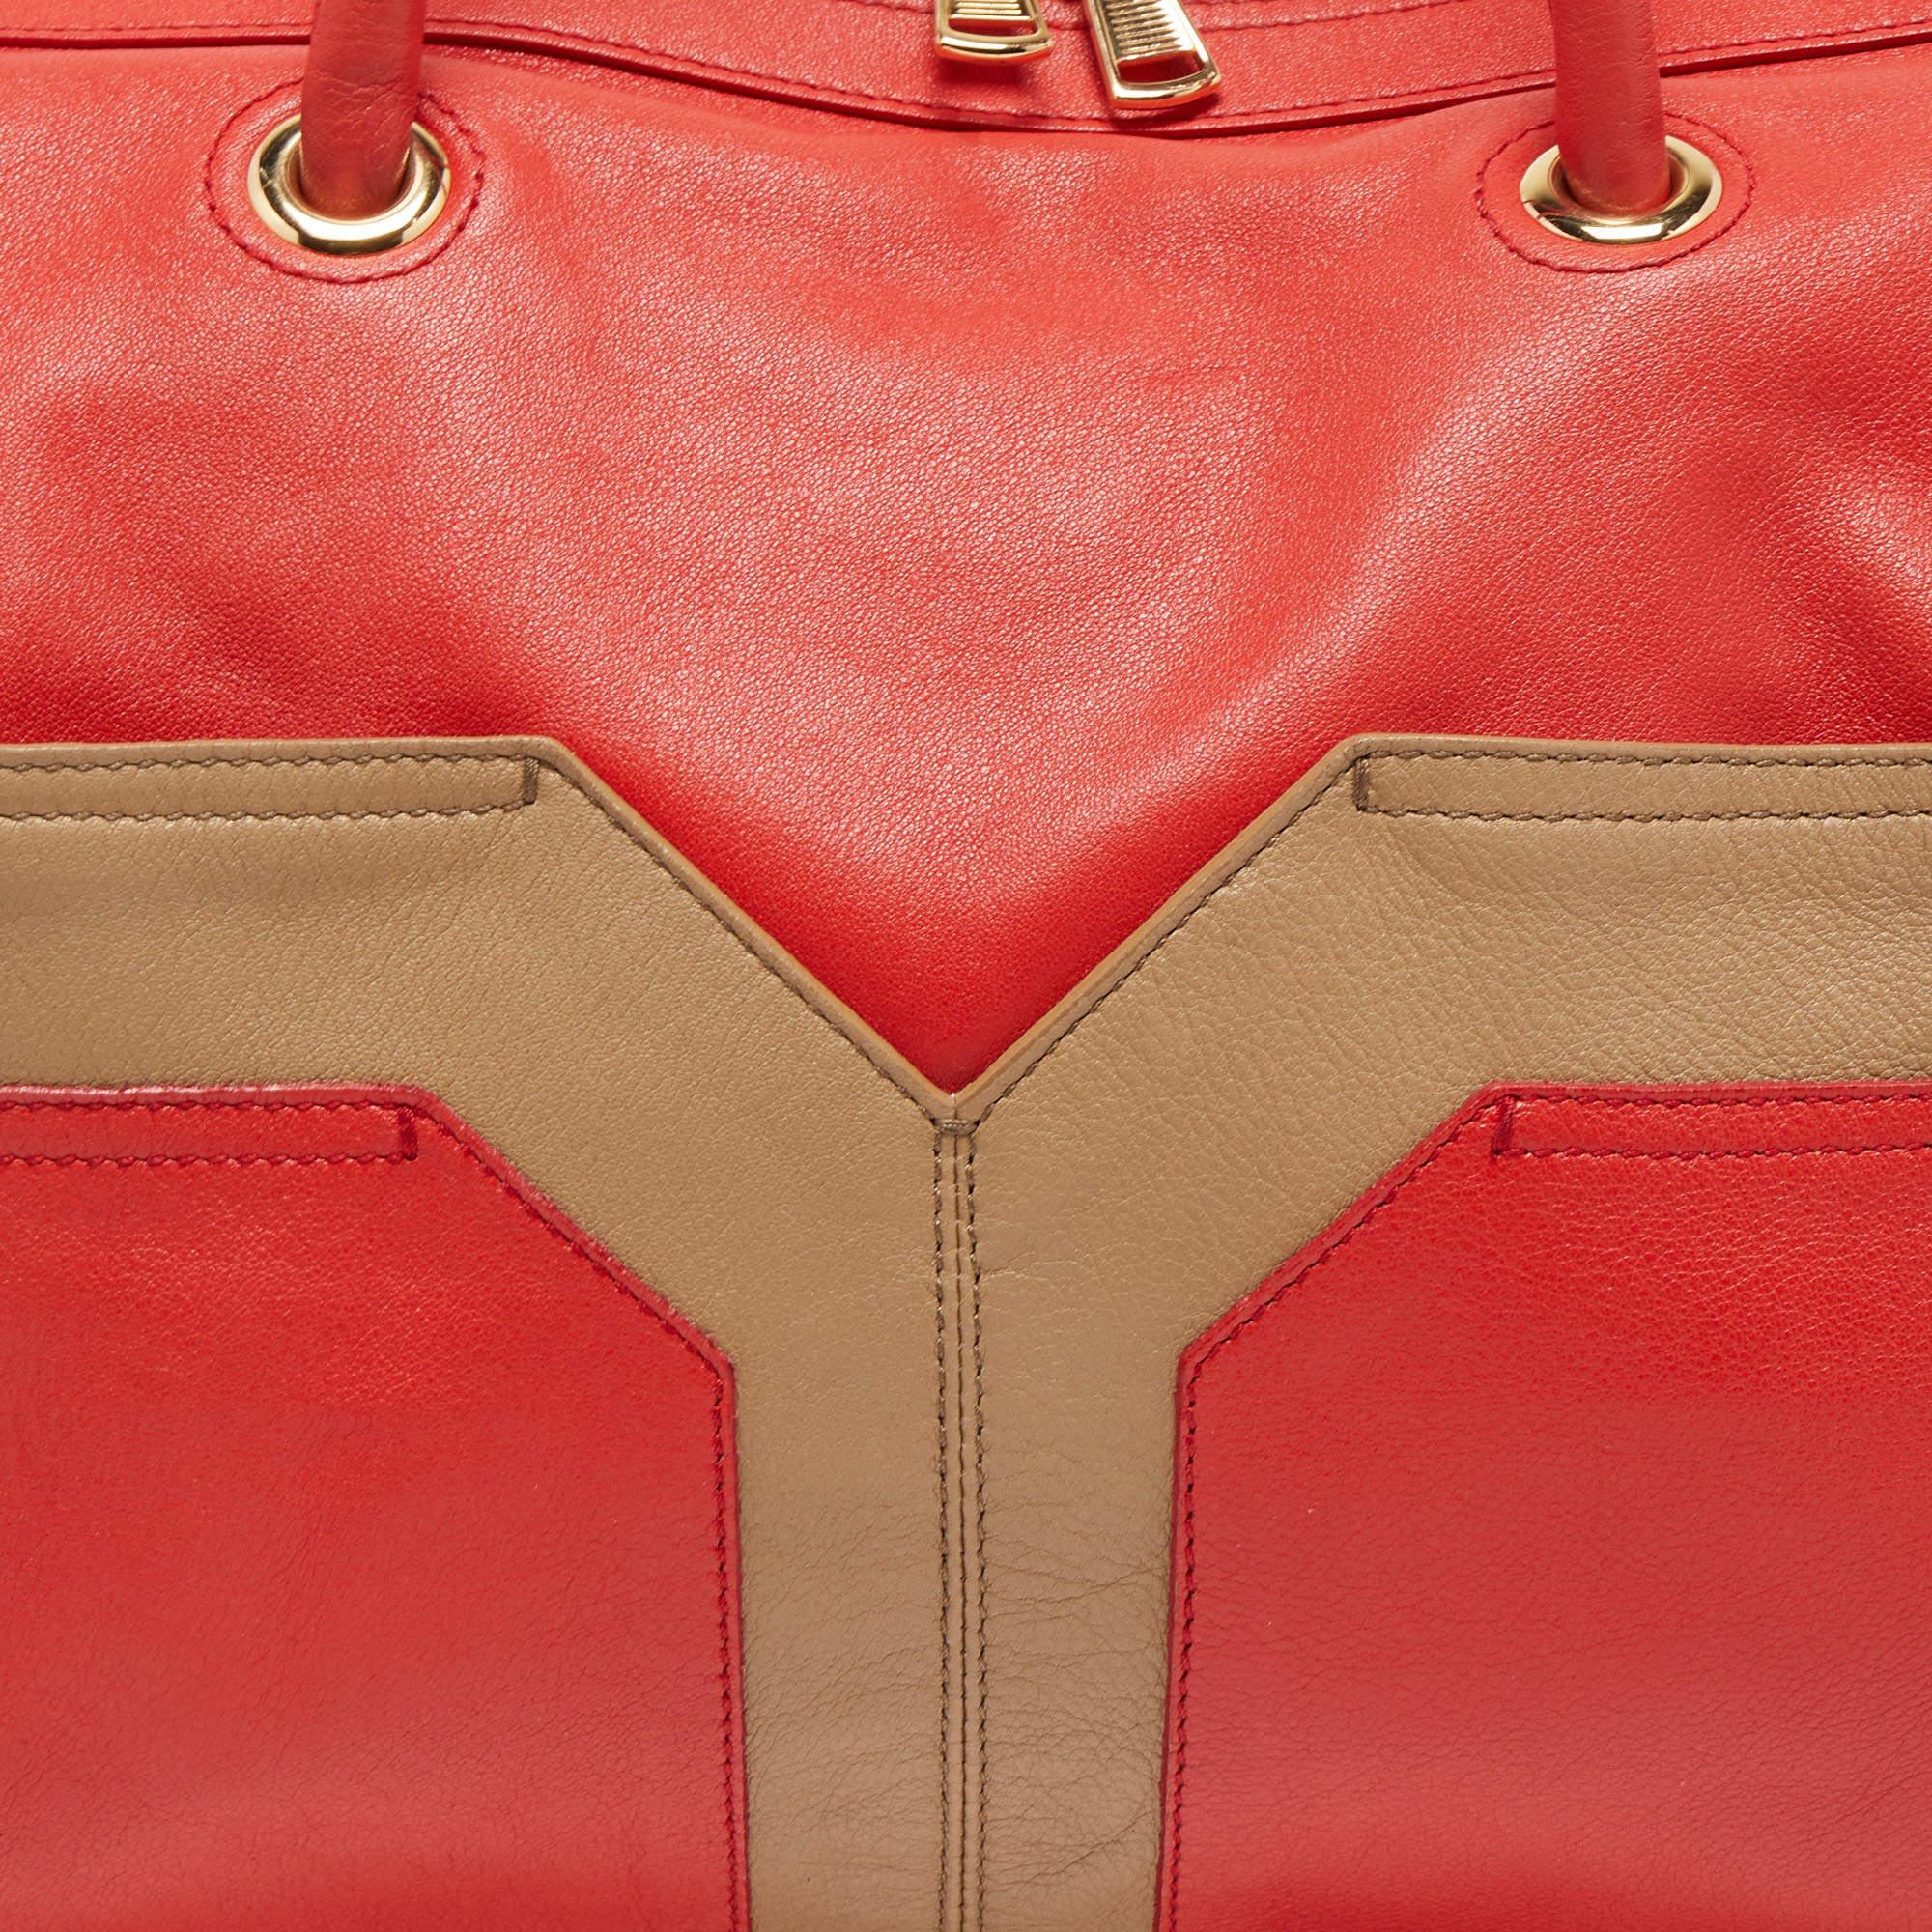 Yves Saint Laurent Red/Beige Leather Lucky Chyc Bowler Bag 14